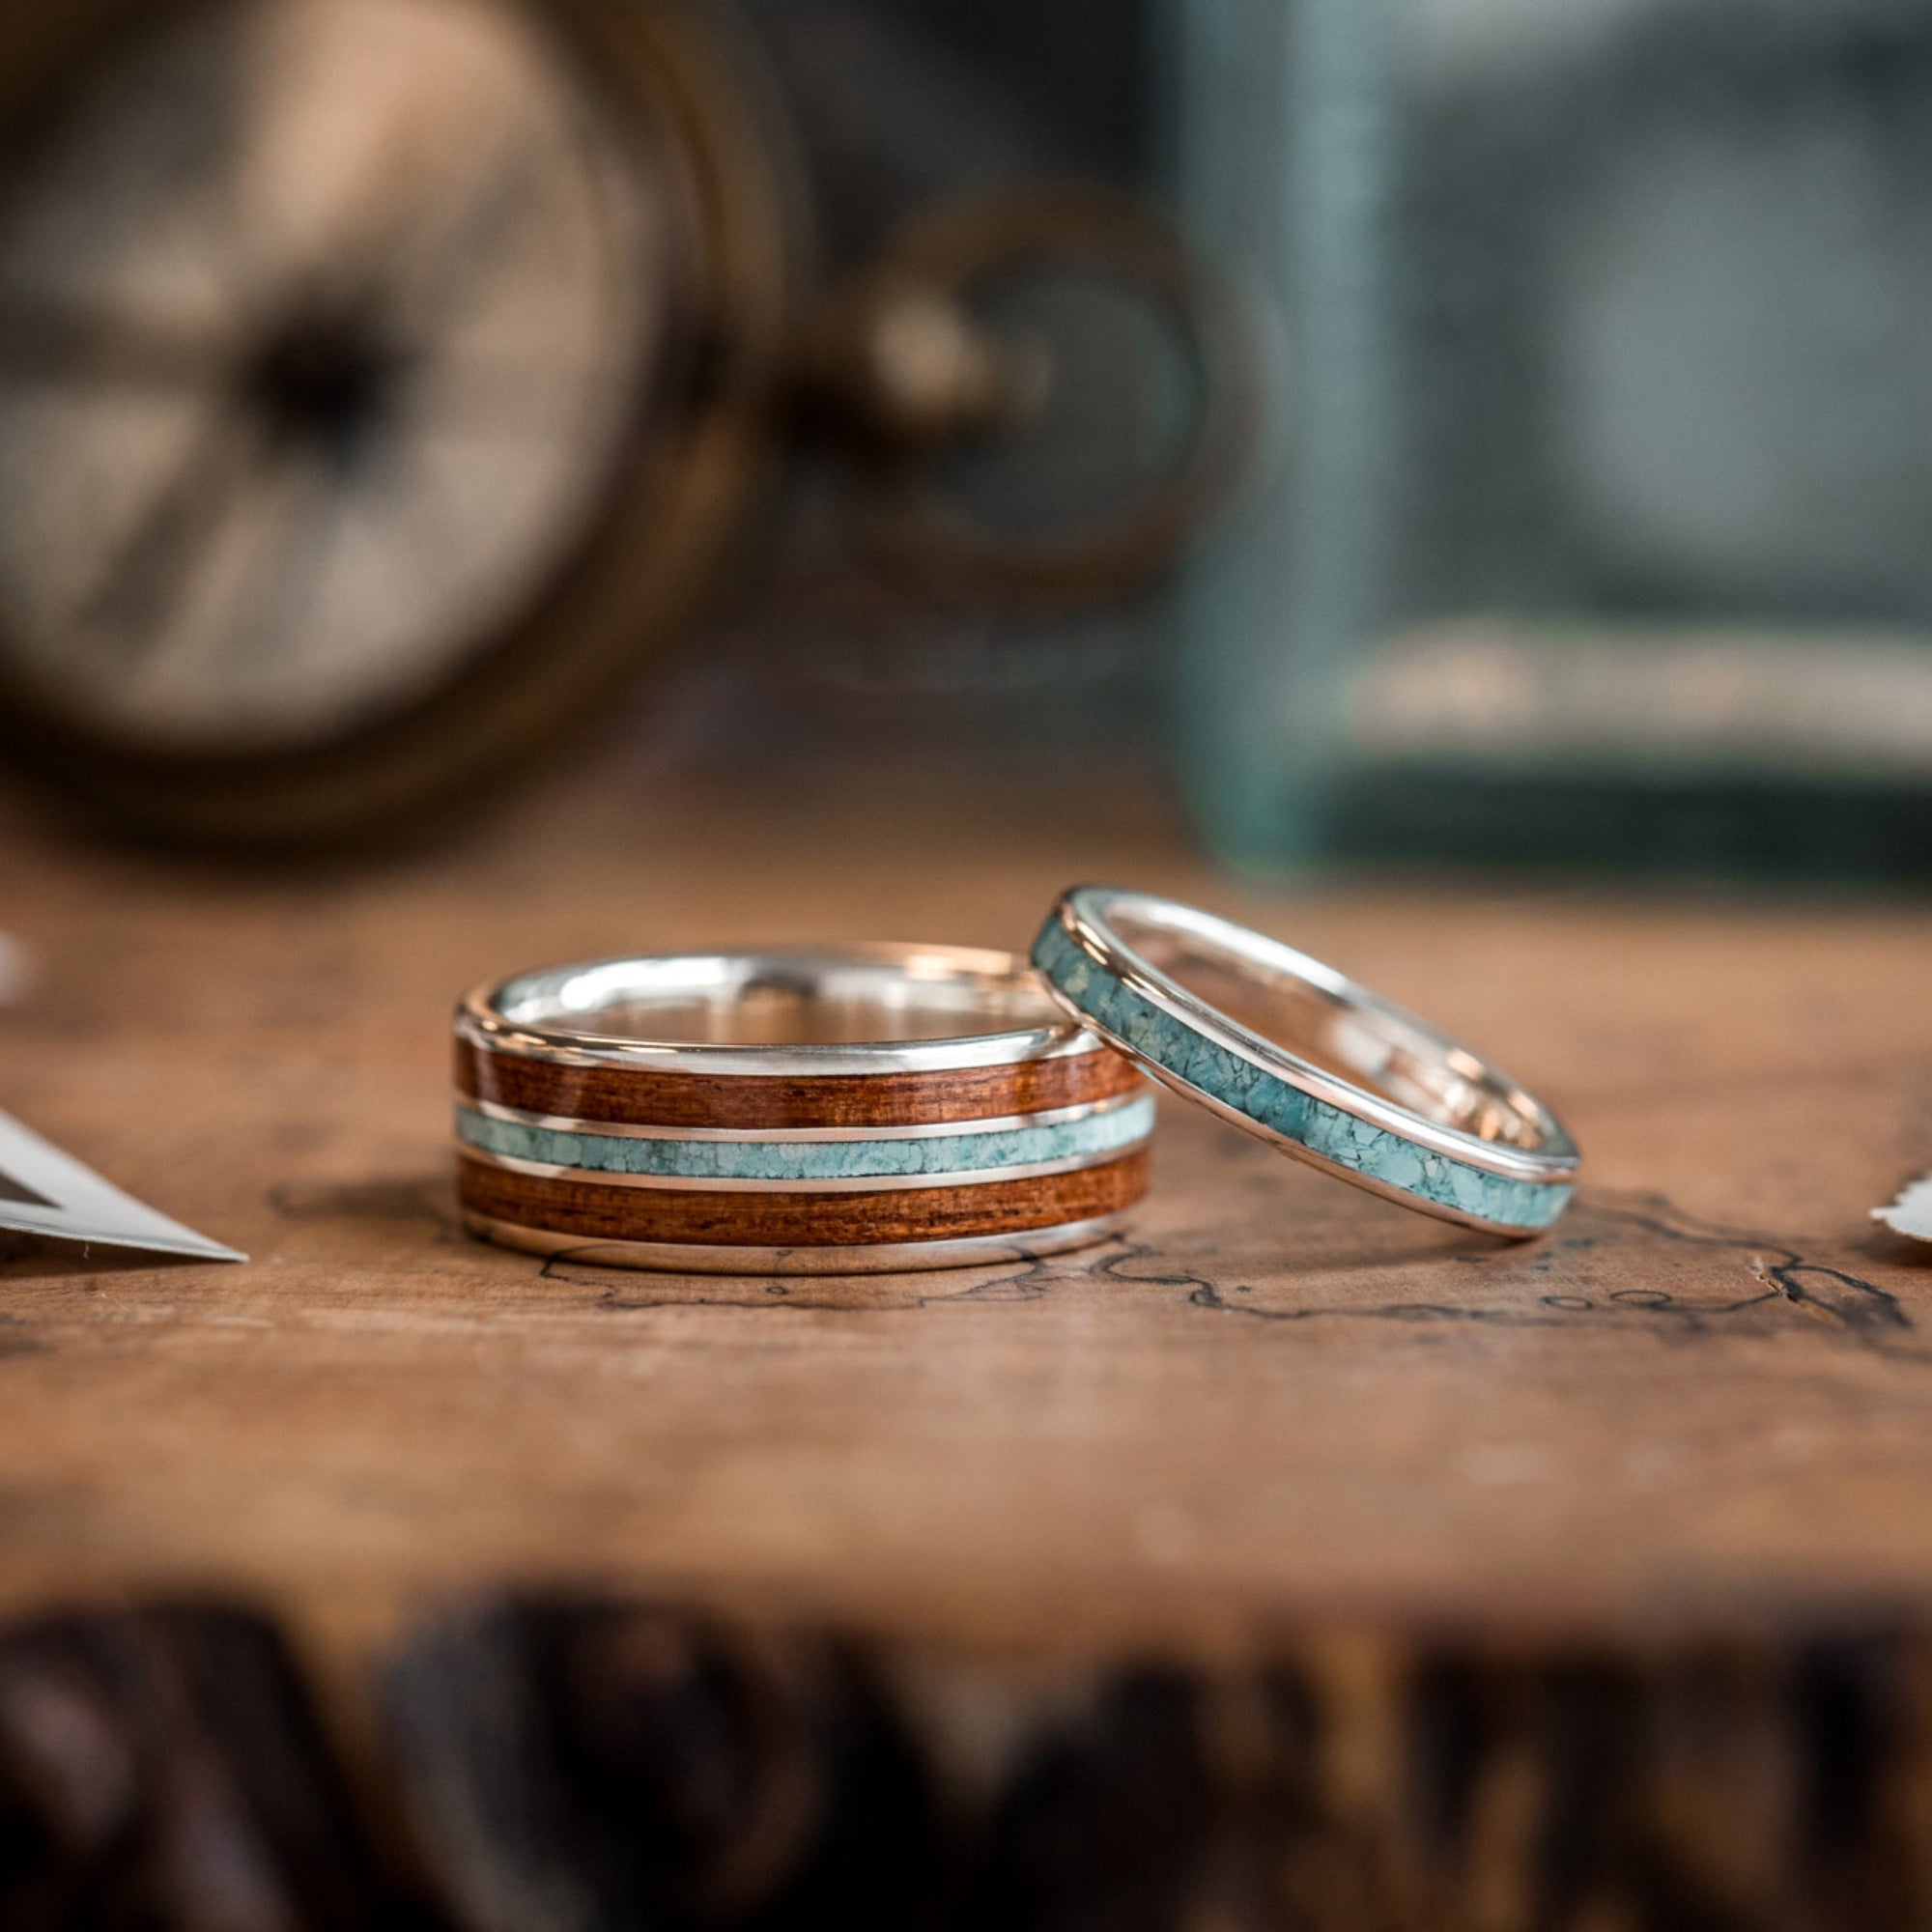 Wedding Rings Sets for Him and Her